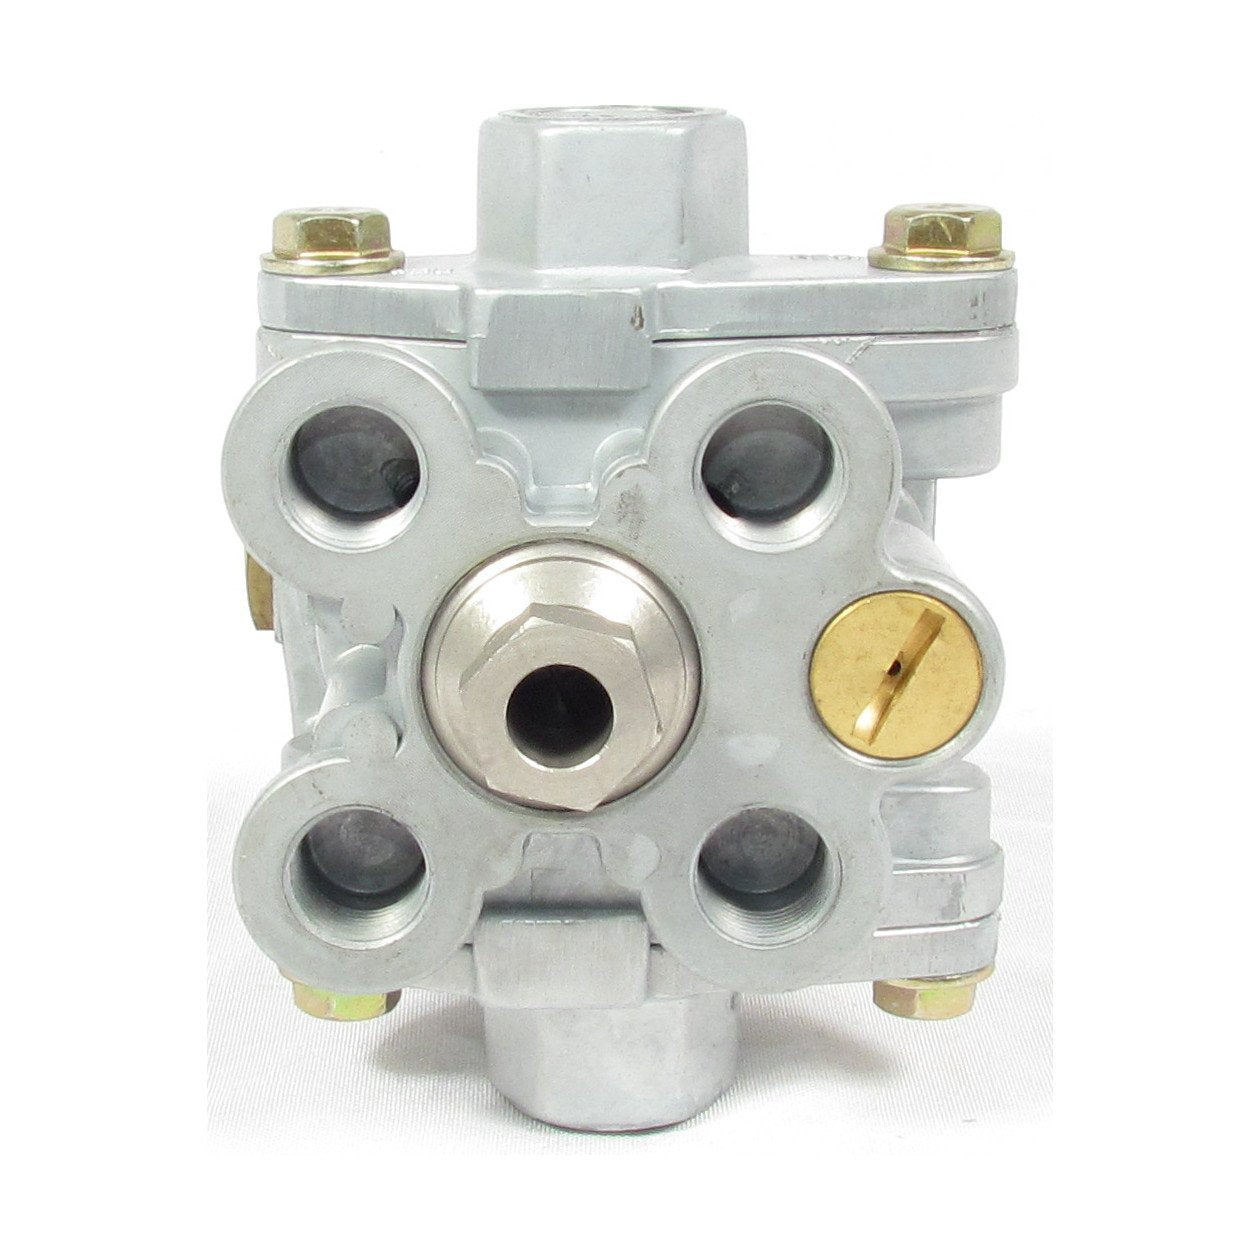 Fortpro Spring Brake Control Valve Replacement for Sealco 110170 | F224667